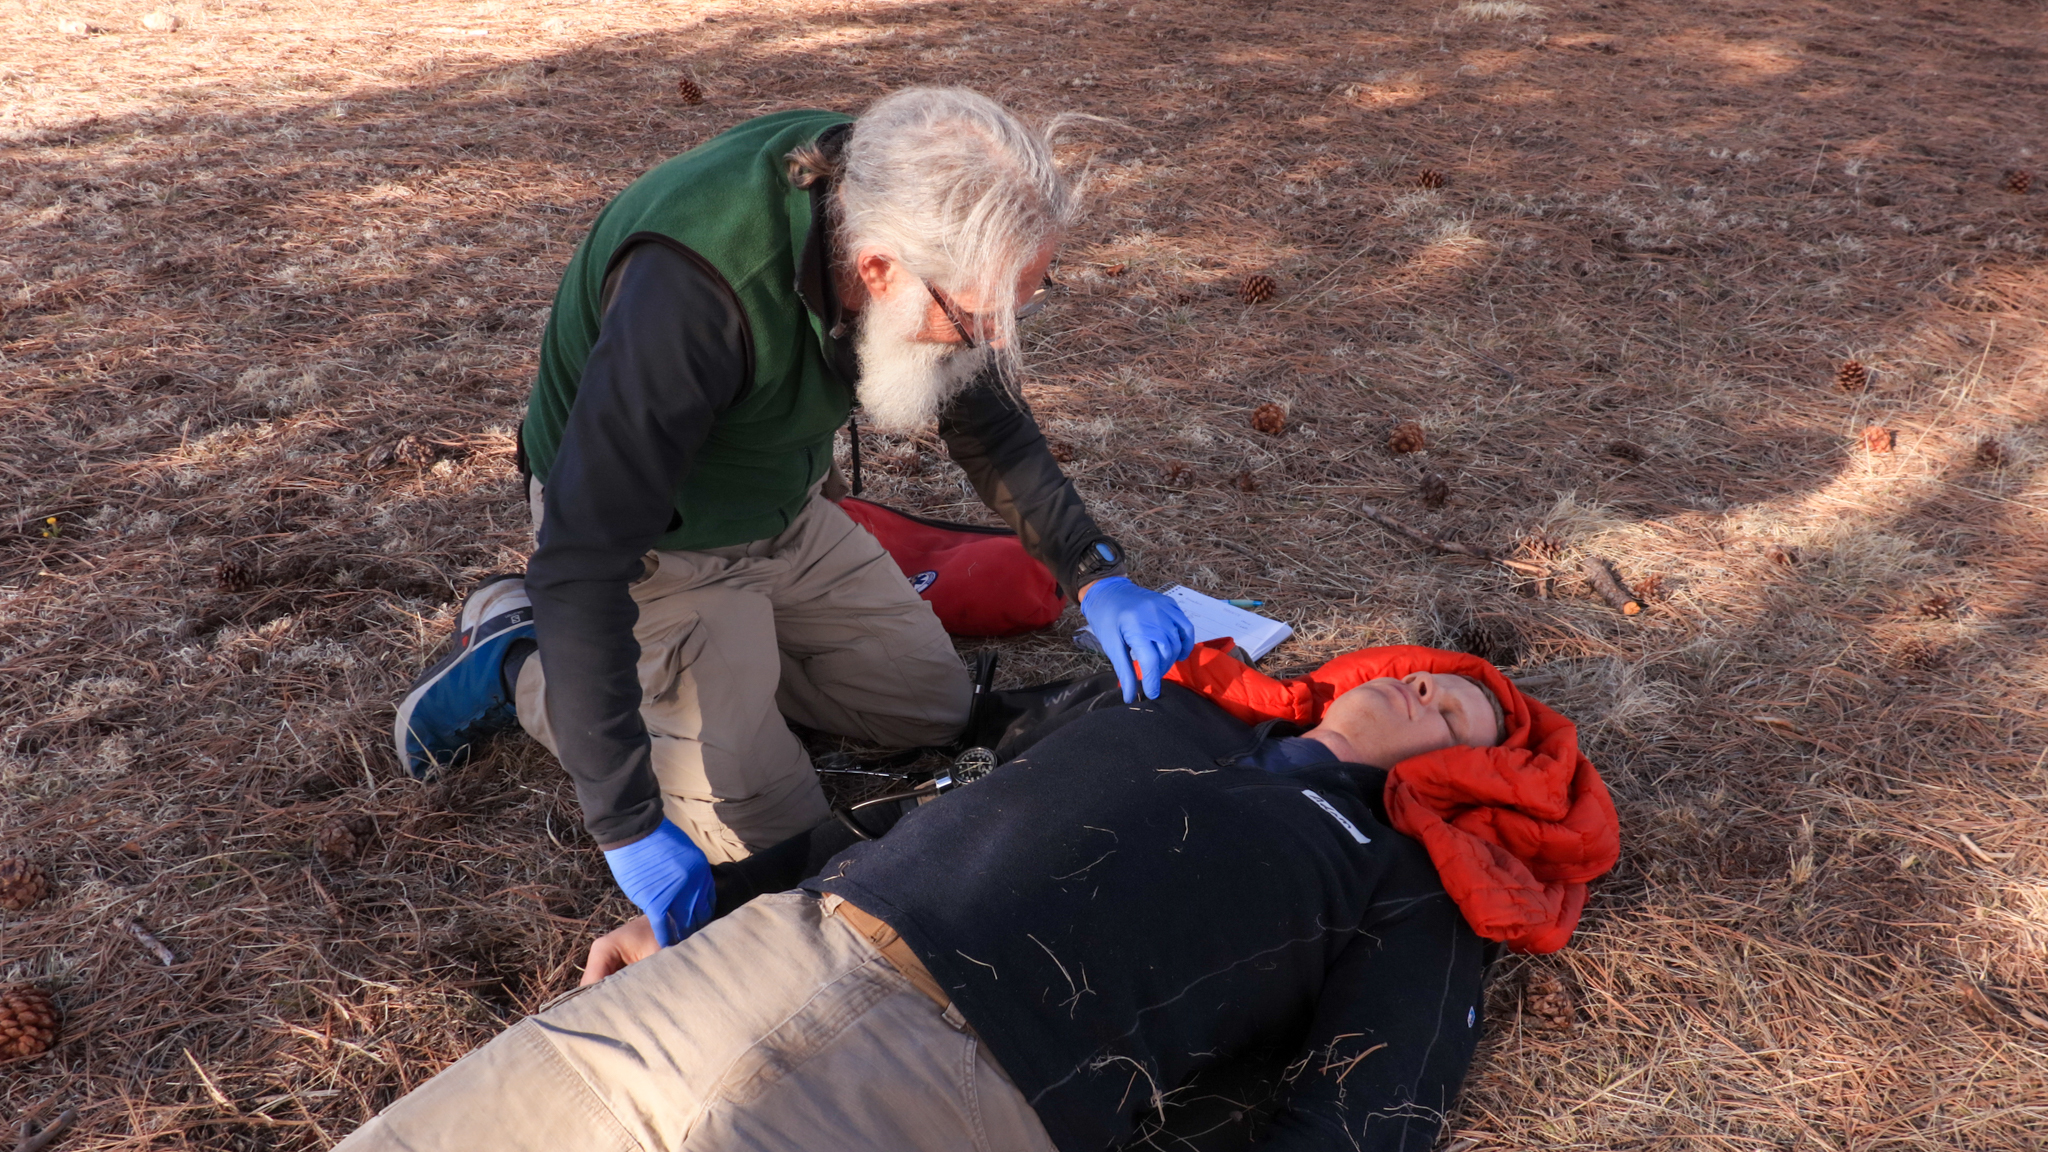 An older man checks the pulse of the an unconscious patient. The patient's neck is stabilized by a coat.